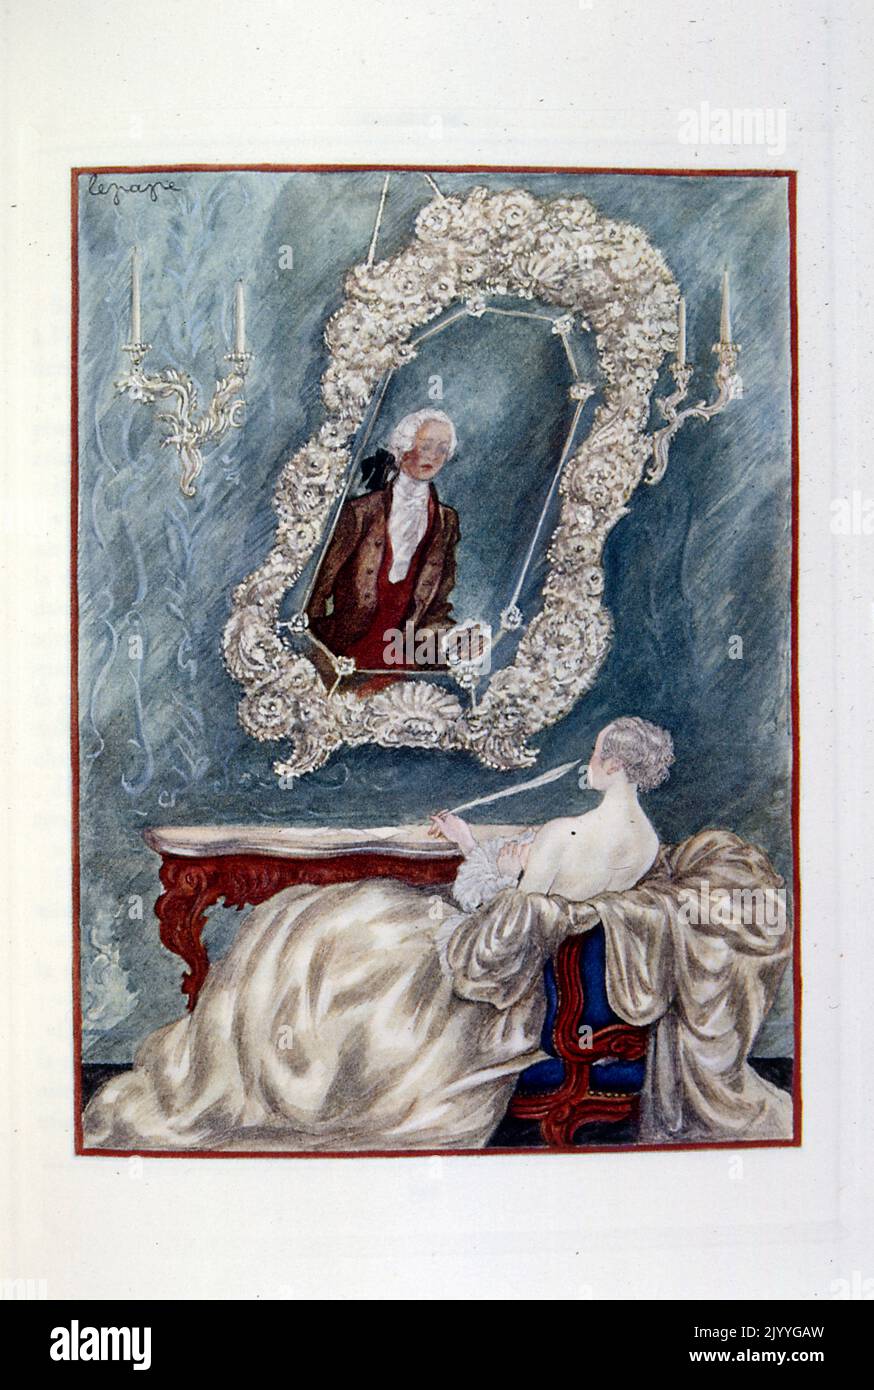 Coloured Illustration from 'OEuvres posthumes' by Alfred de Musset depicting a lady penning a letter with a quill at a desk. Illustrated by Georges Lepape. Stock Photo